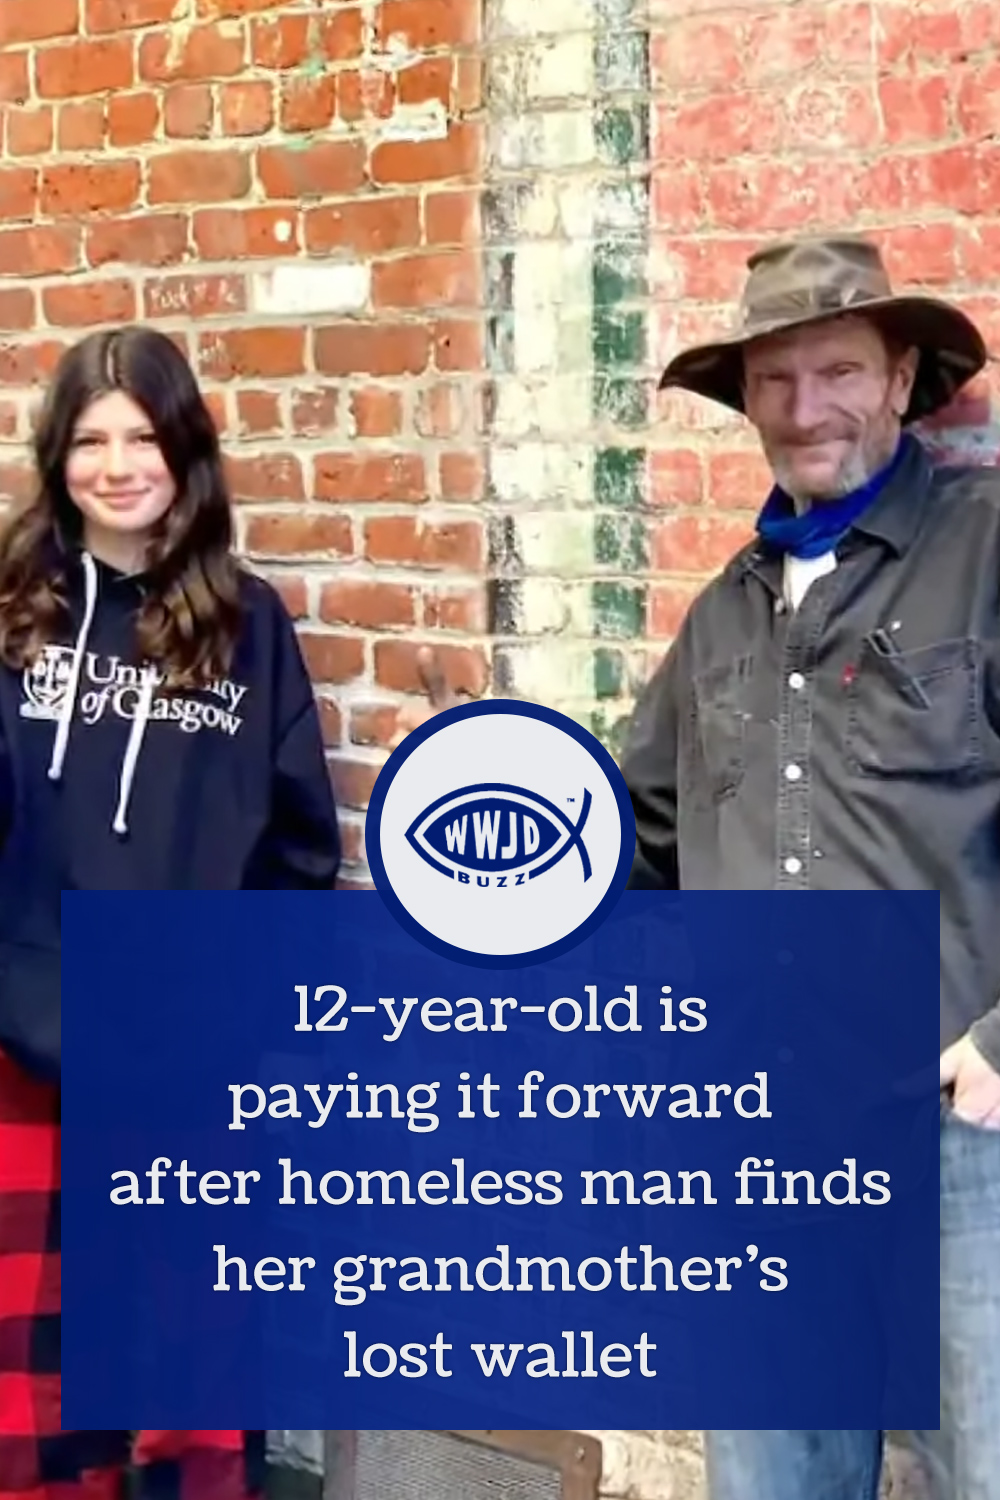 12-year-old is paying it forward after homeless man finds her grandmother’s lost wallet